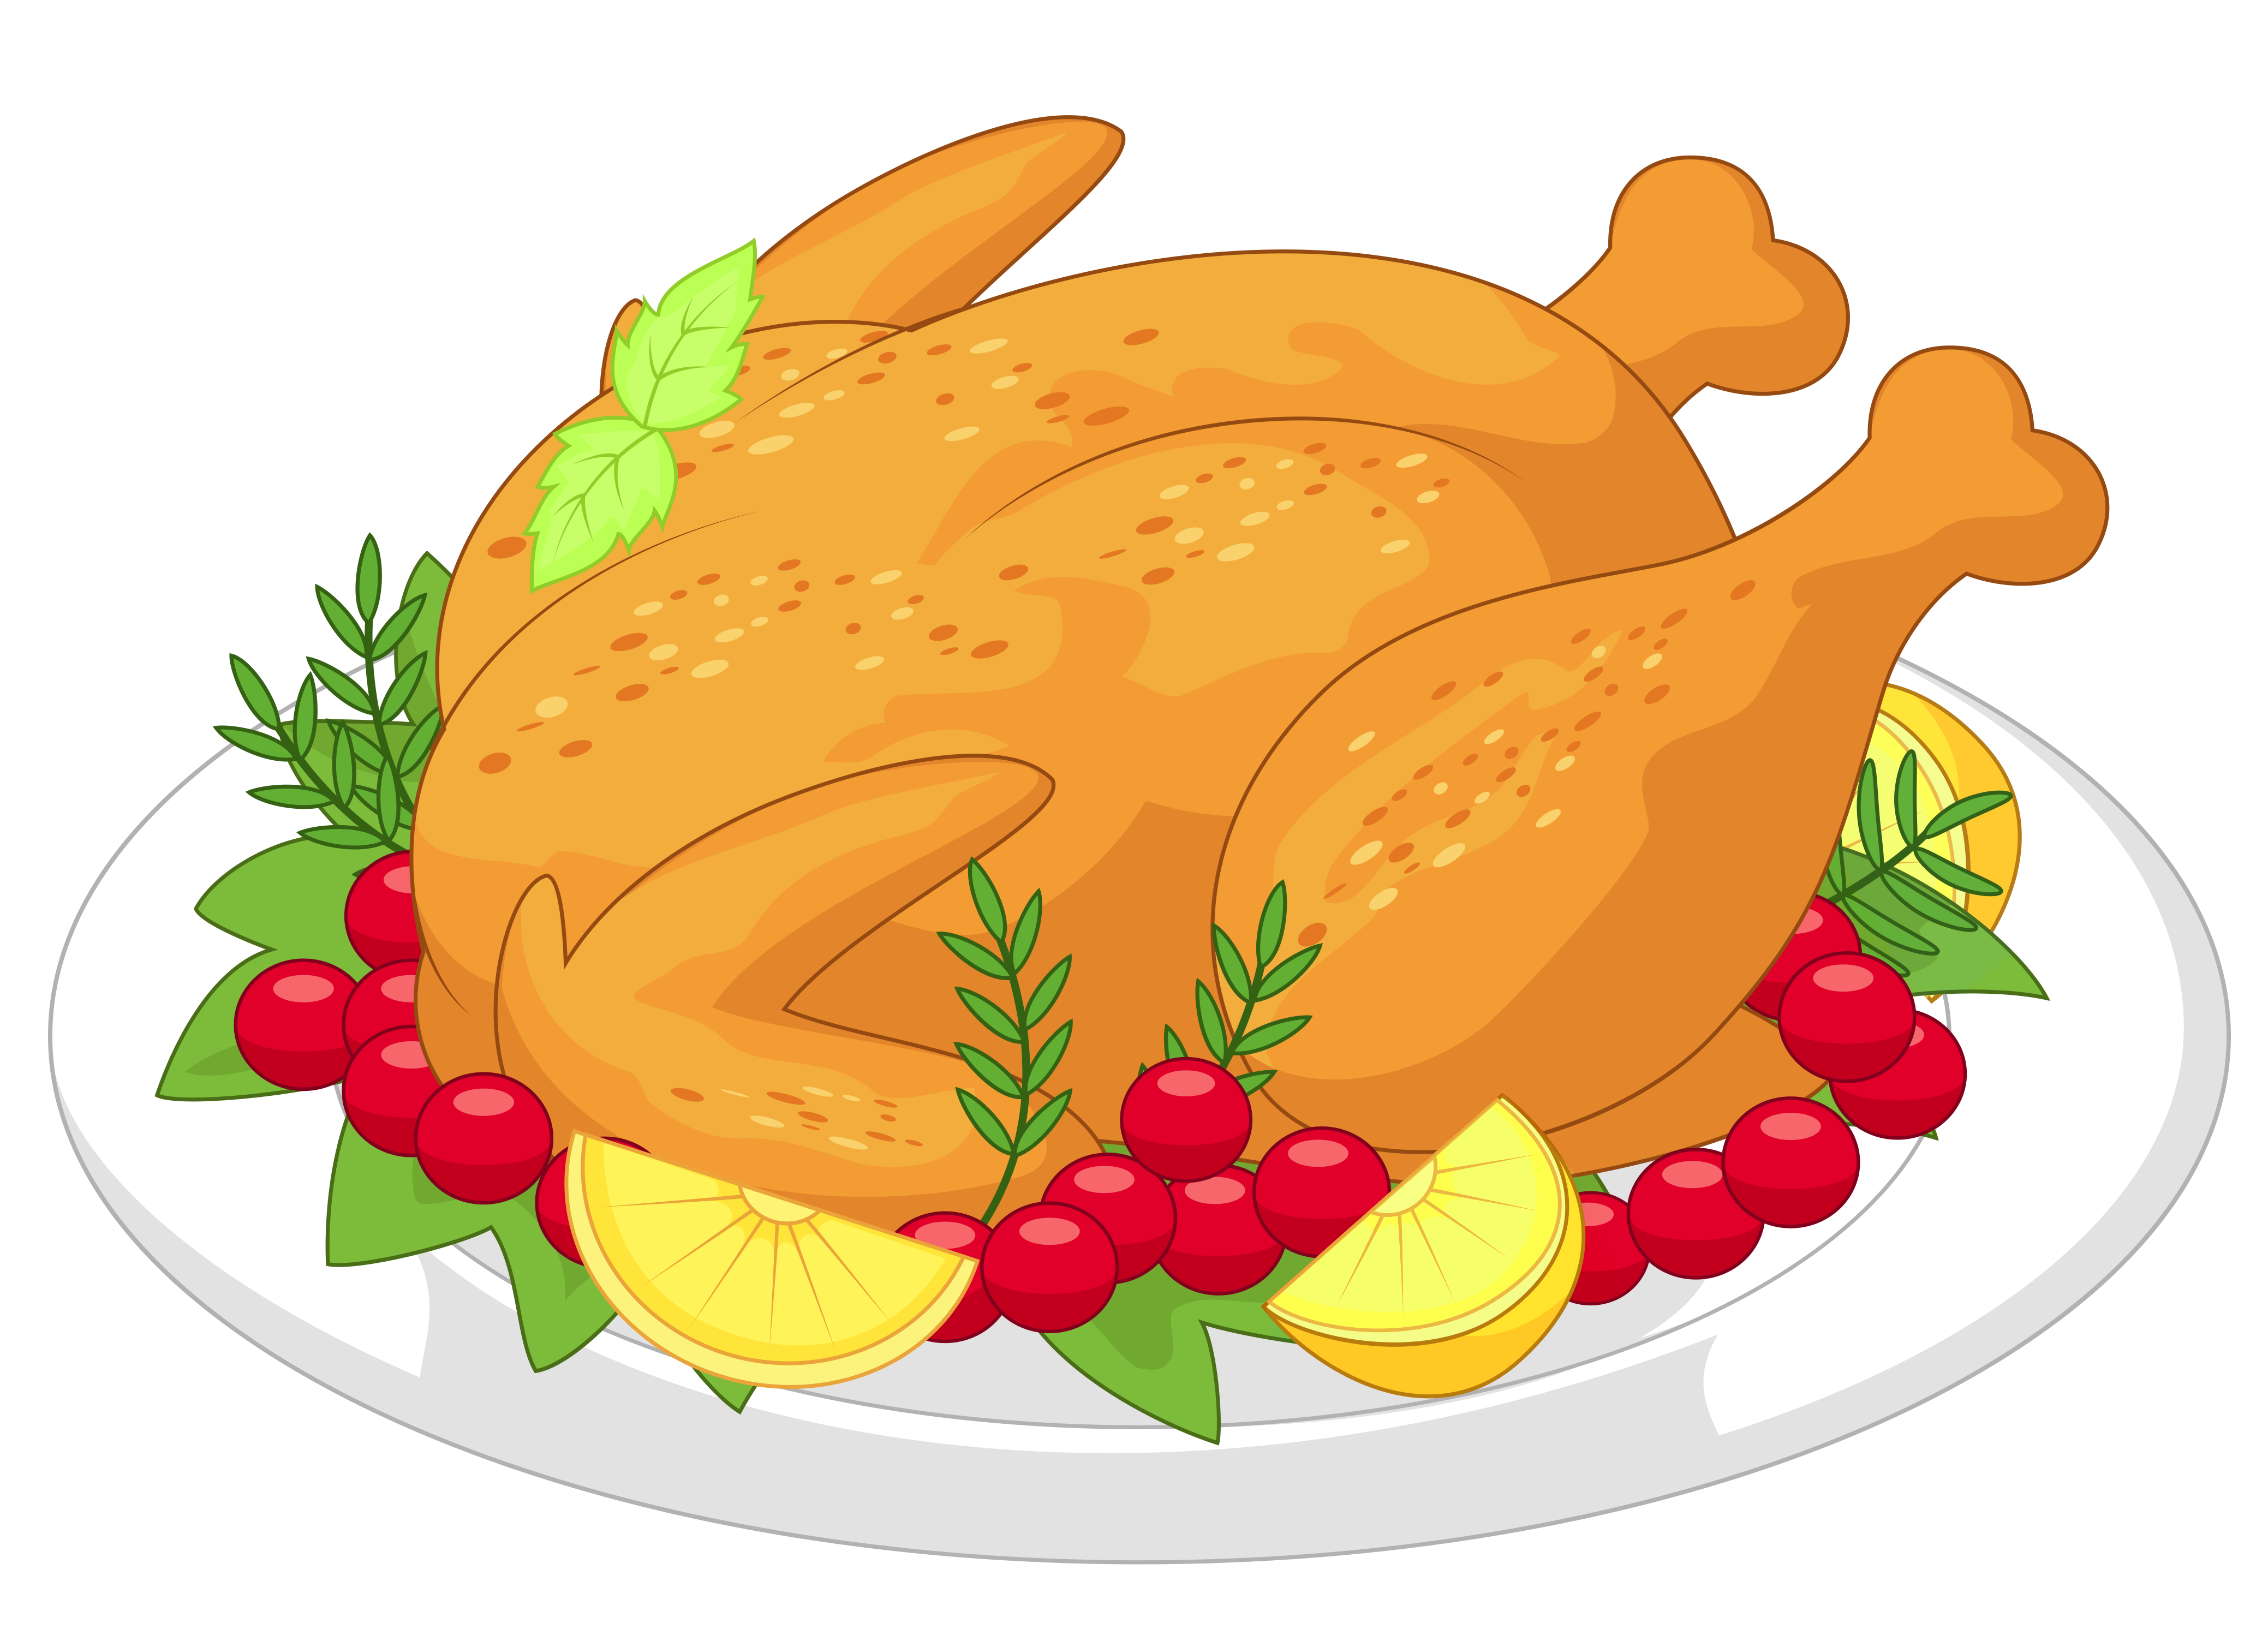 Thanksgiving turkey dinner clipart free images 2 - Clipartix